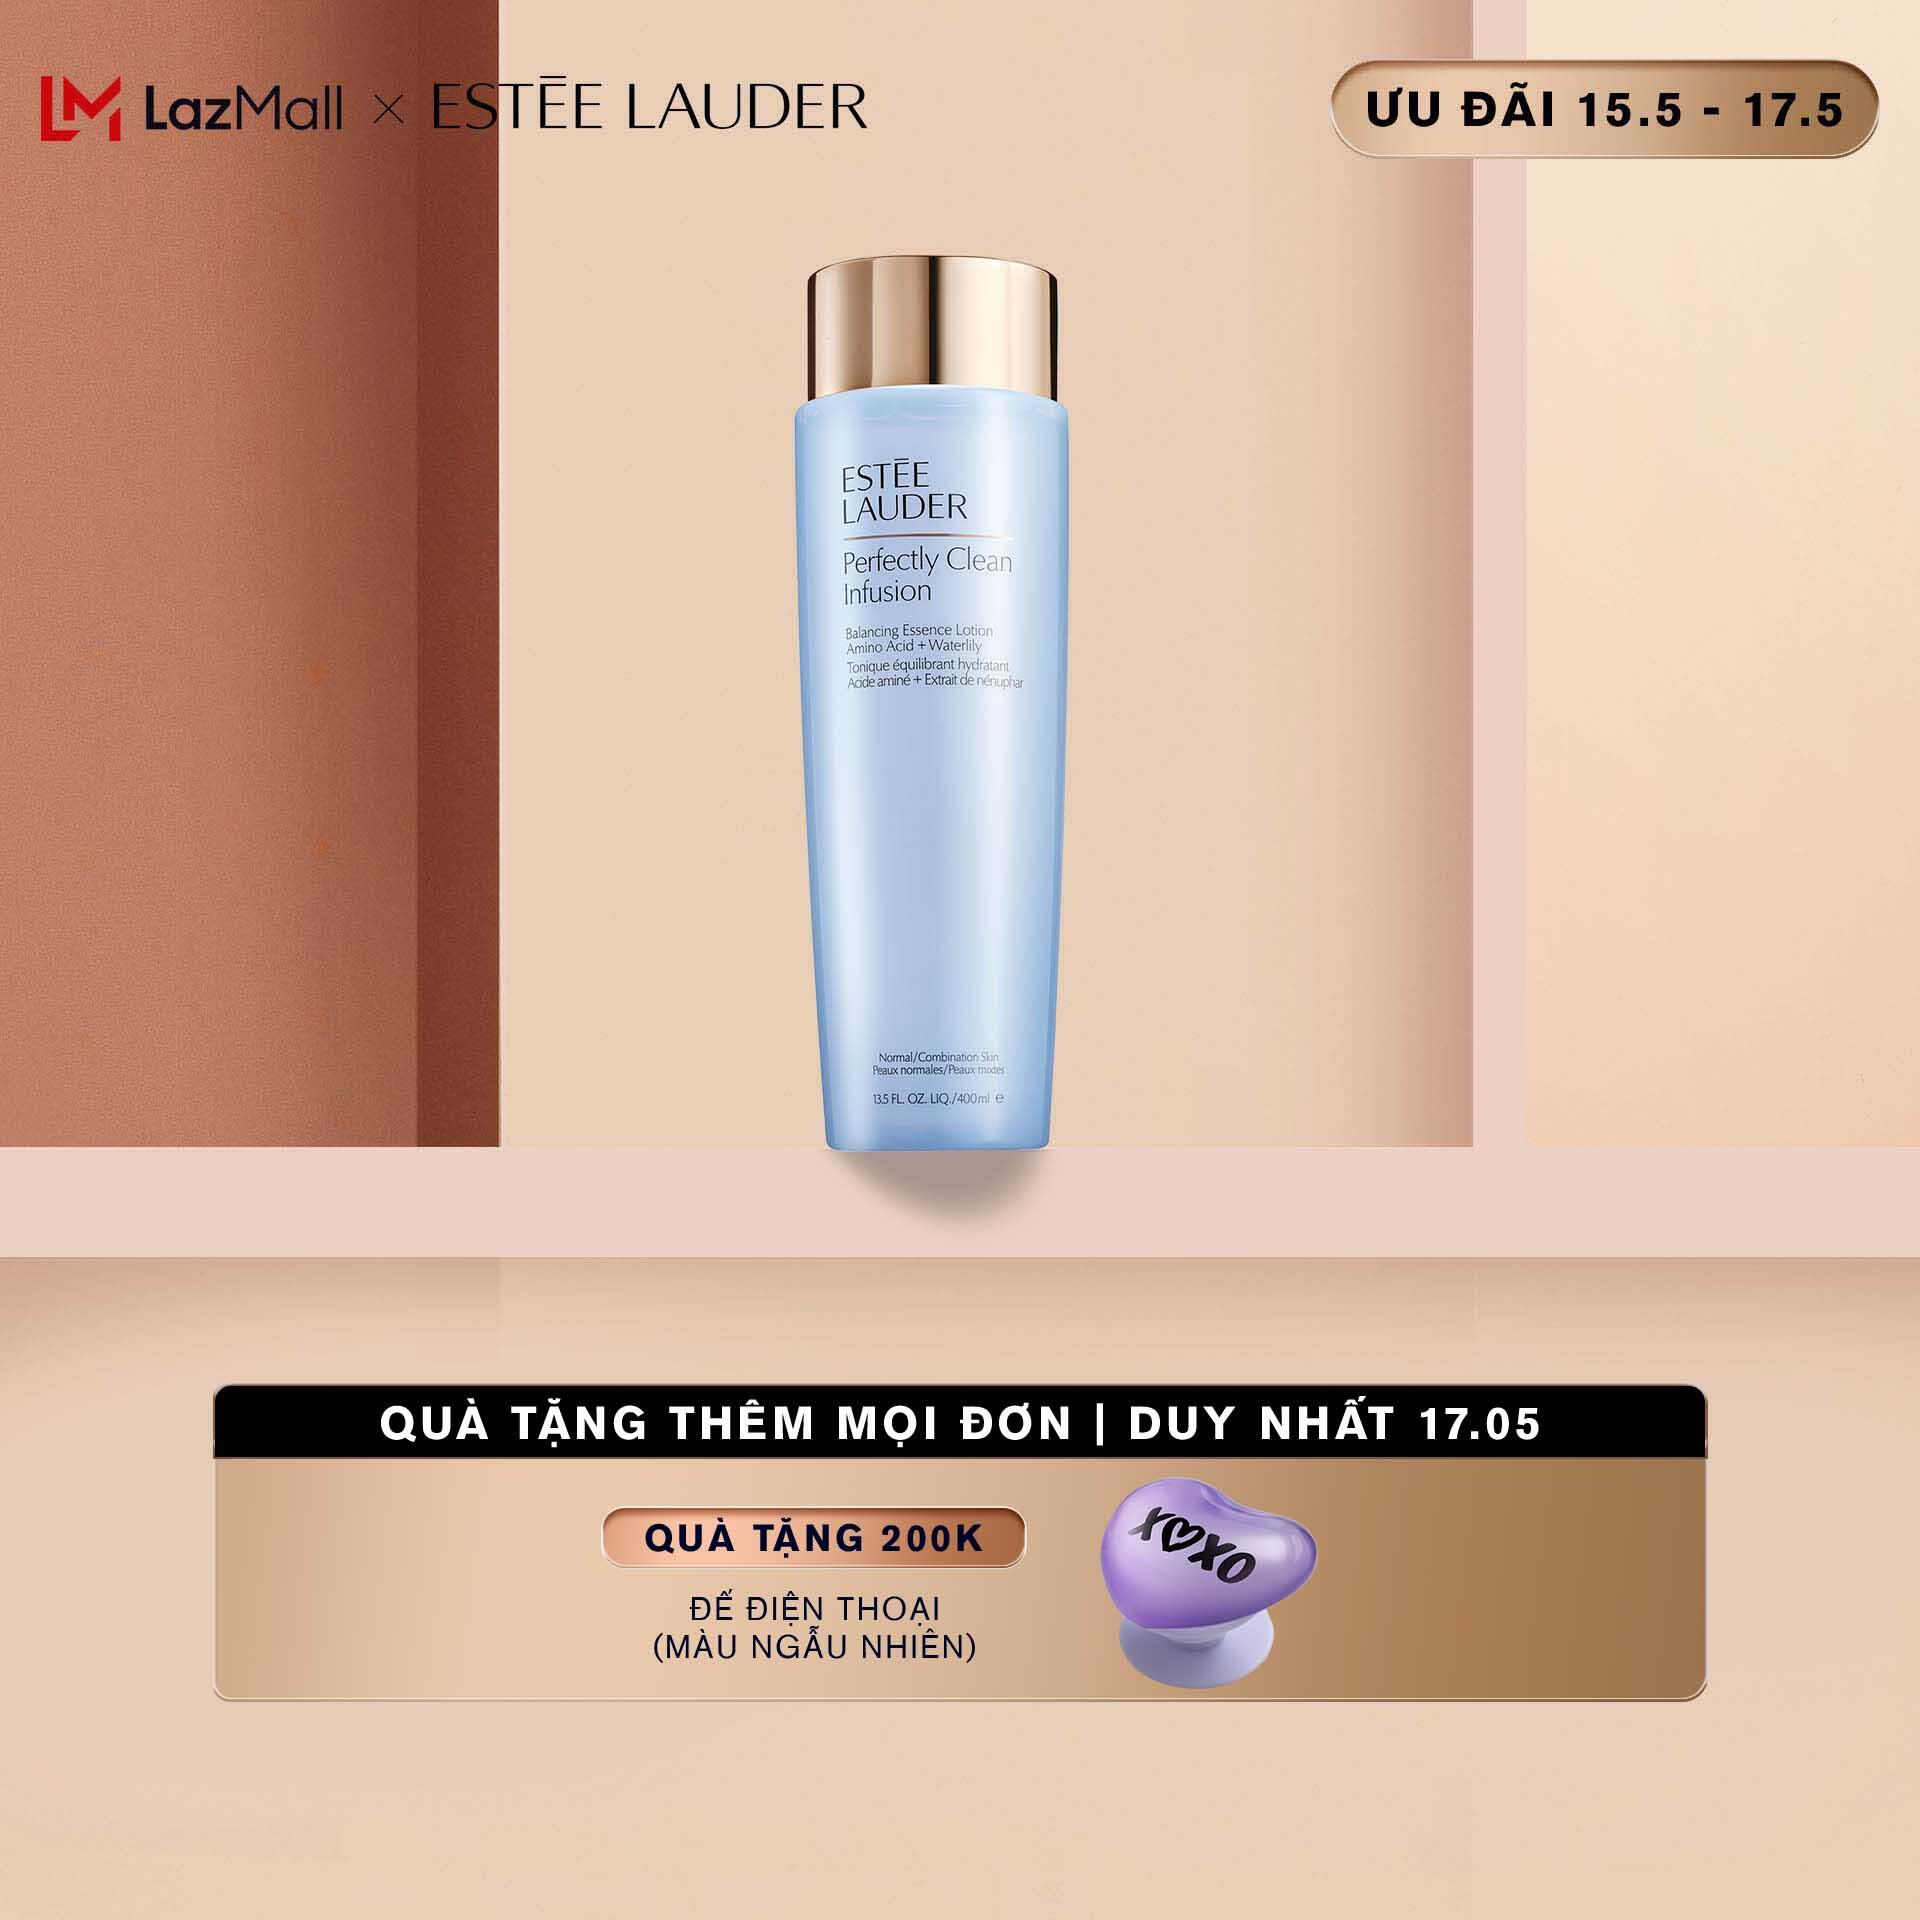 Nước cân bằng cấp ẩm Estee Lauder Perfectly Clean Infusion Balancing Essence Lotion with Amino Acid + Waterlily - Essence Lotion 400ml